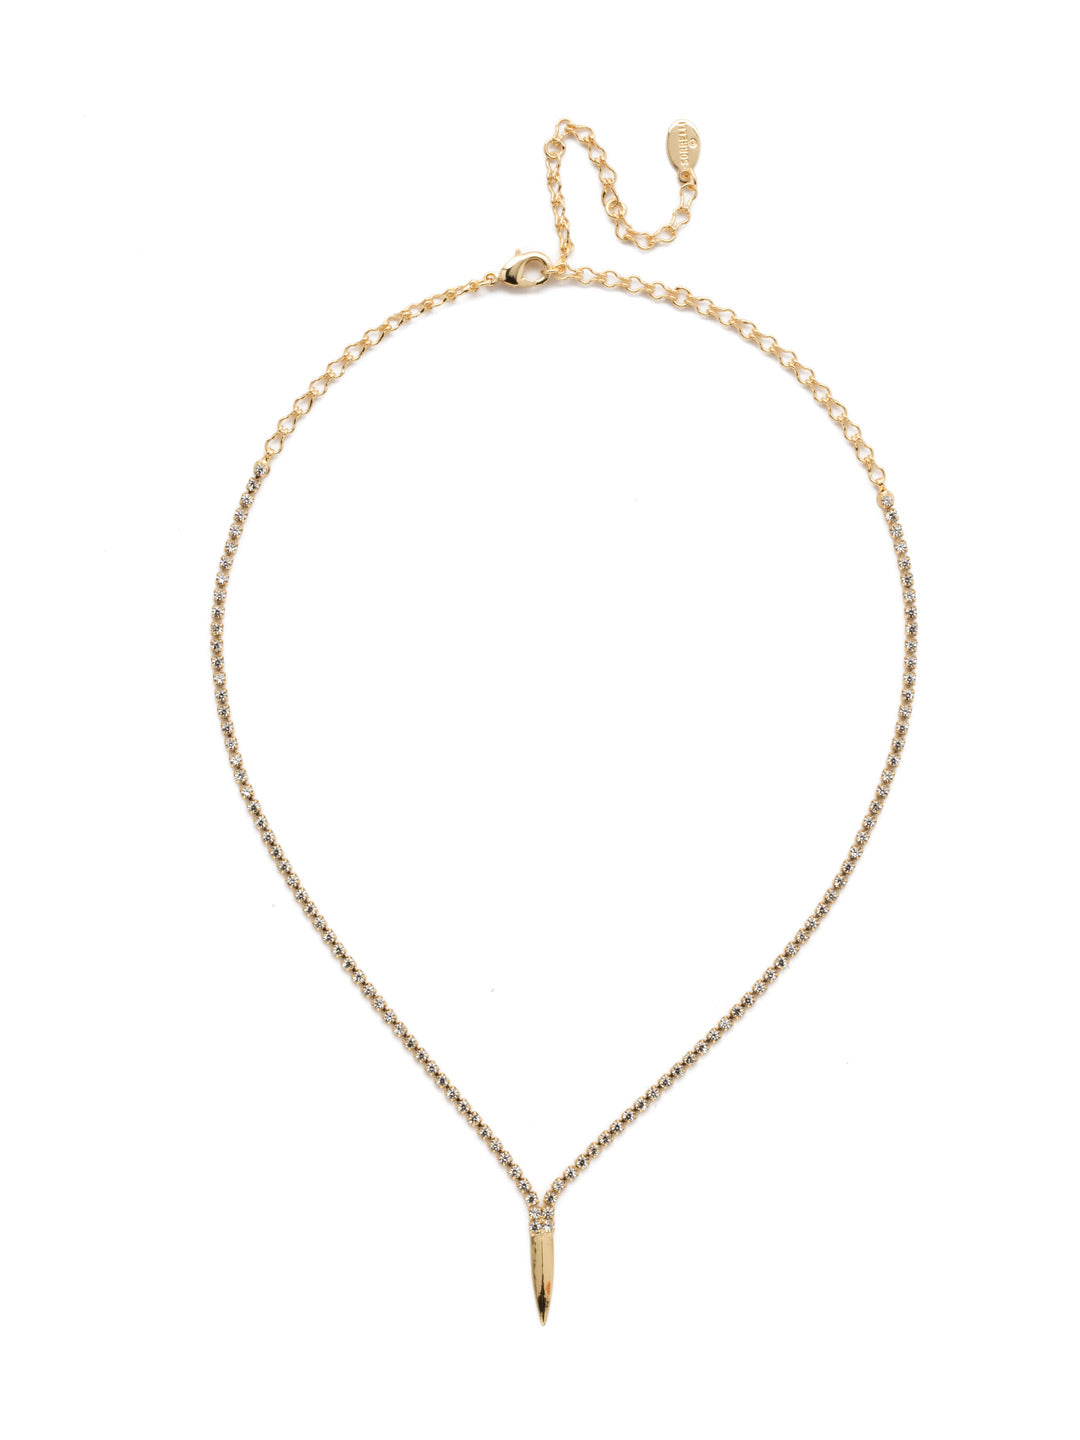 Dixie Pendant Necklace - 4NEP13BGCRY - <p>When you want to sparkle, put on the Dixie Pendant Necklace. Encrusted in crystals, it features a metallic pendant point at the end to bring it the attention it deserves. From Sorrelli's Crystal collection in our Bright Gold-tone finish.</p>